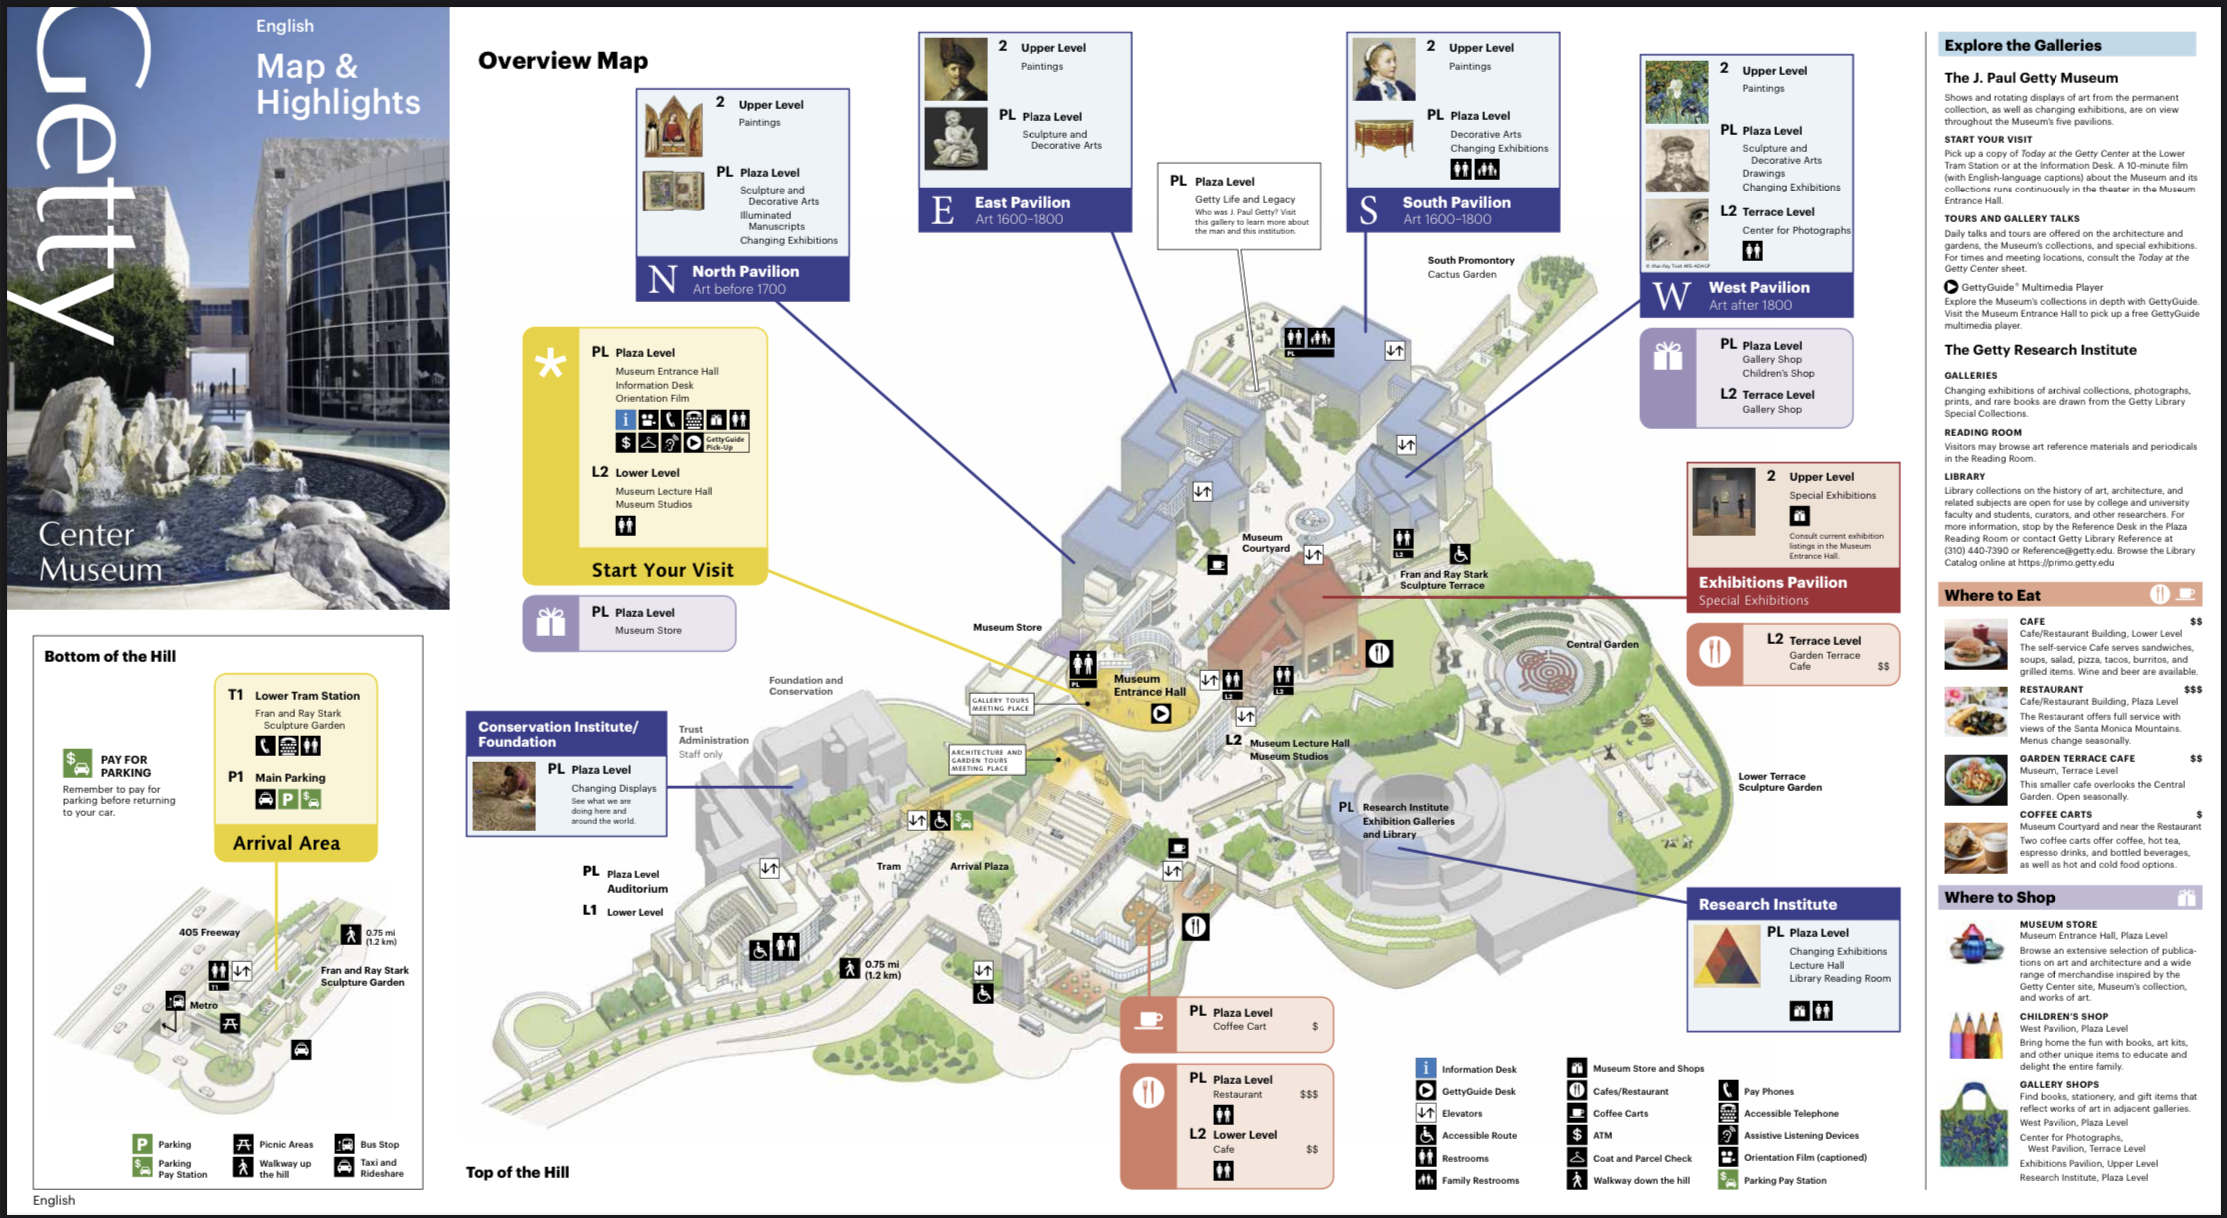 The Getty Center Museum Map